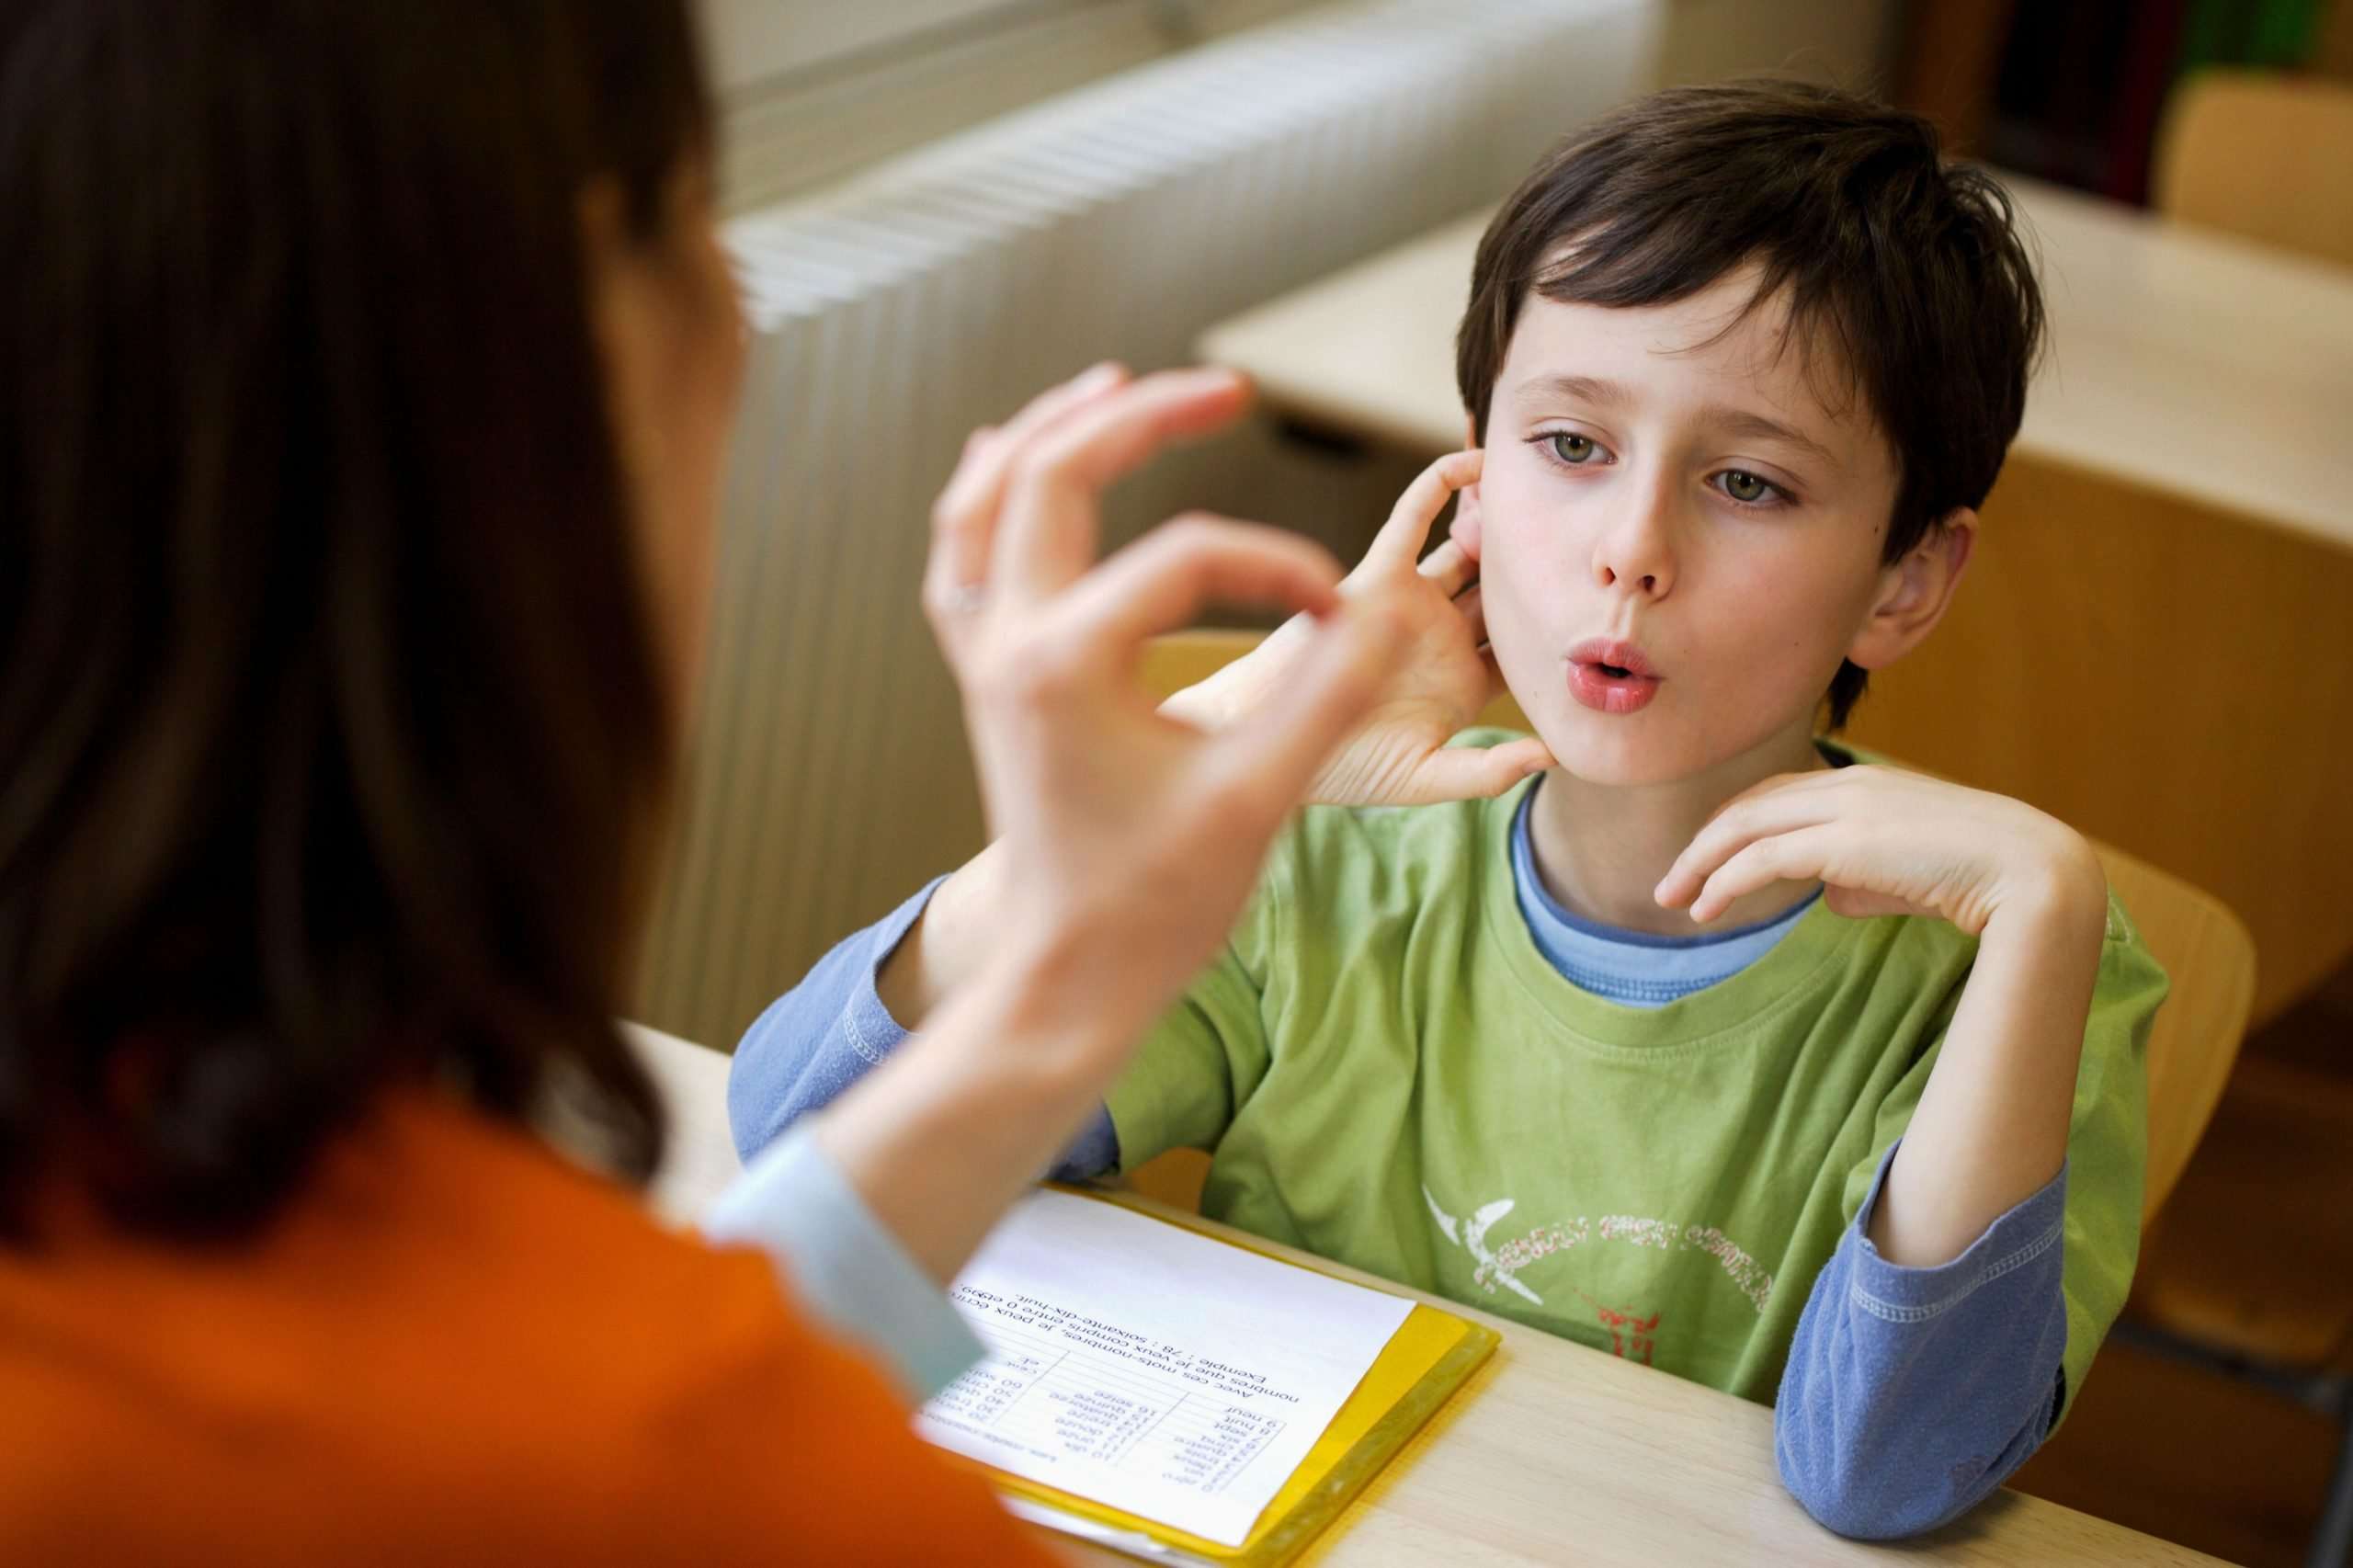 How to Find a Speech Therapist for Your Autistic Child